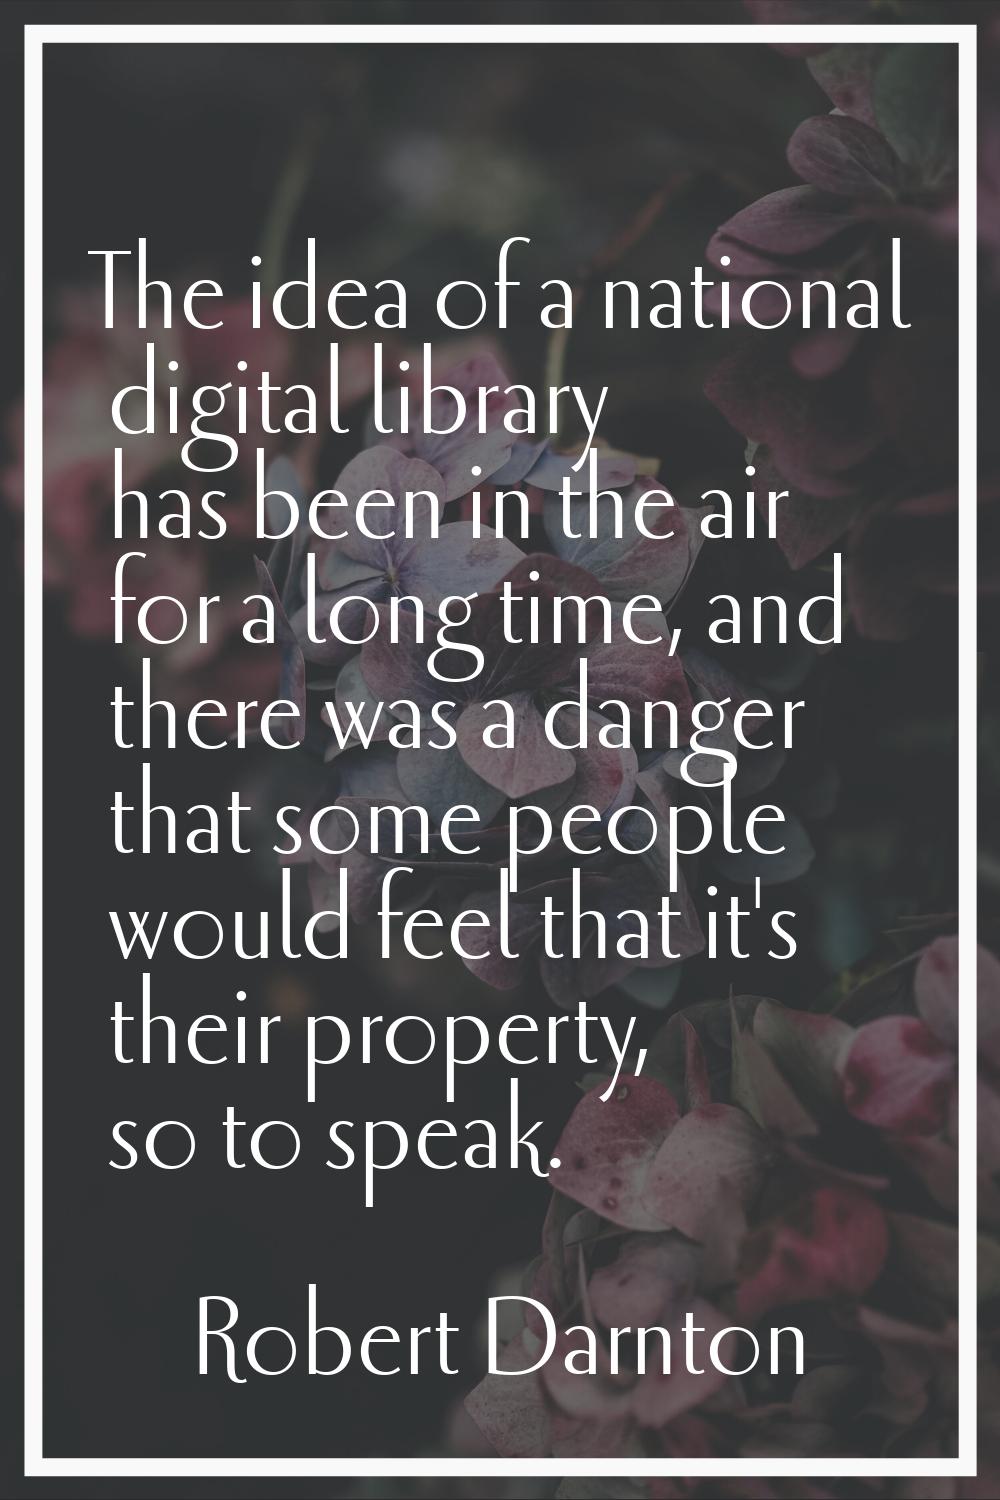 The idea of a national digital library has been in the air for a long time, and there was a danger 